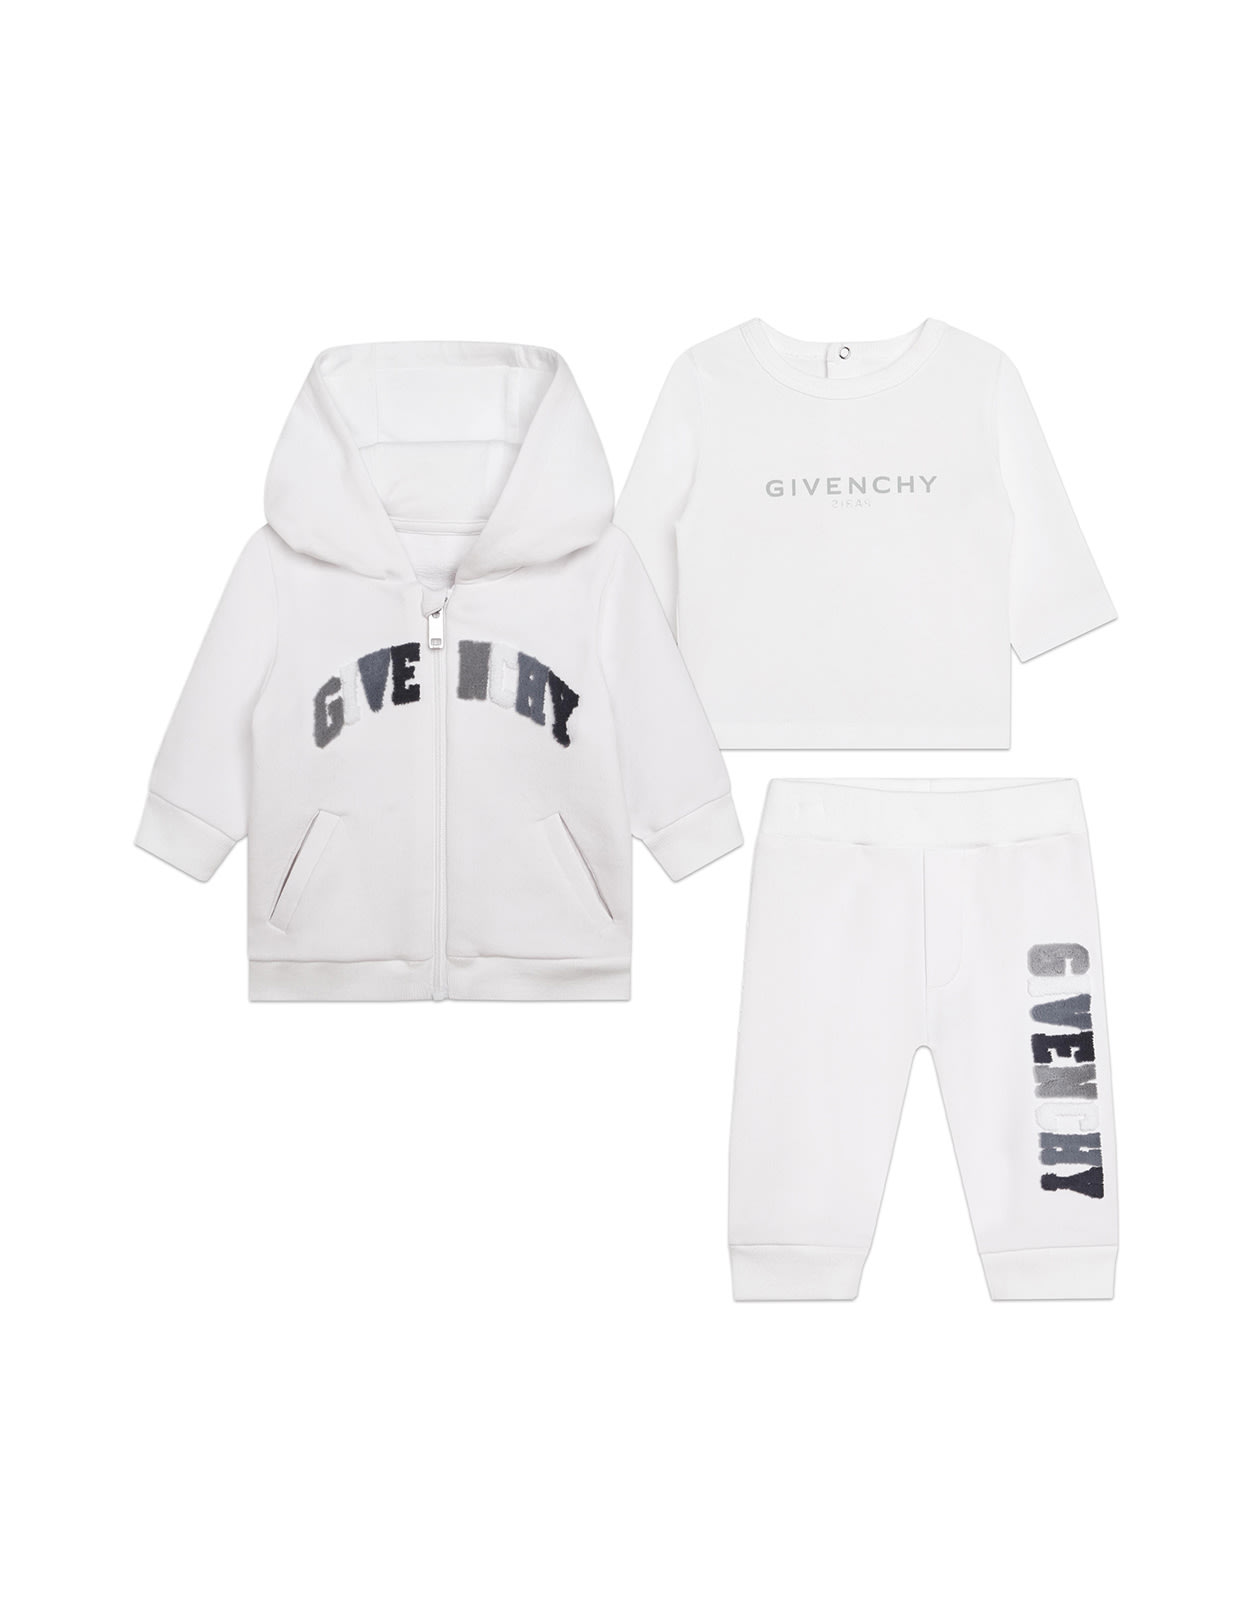 GIVENCHY WHITE 3-PIECE SET WITH CONTRASTING TERRYCLOTH LOGO